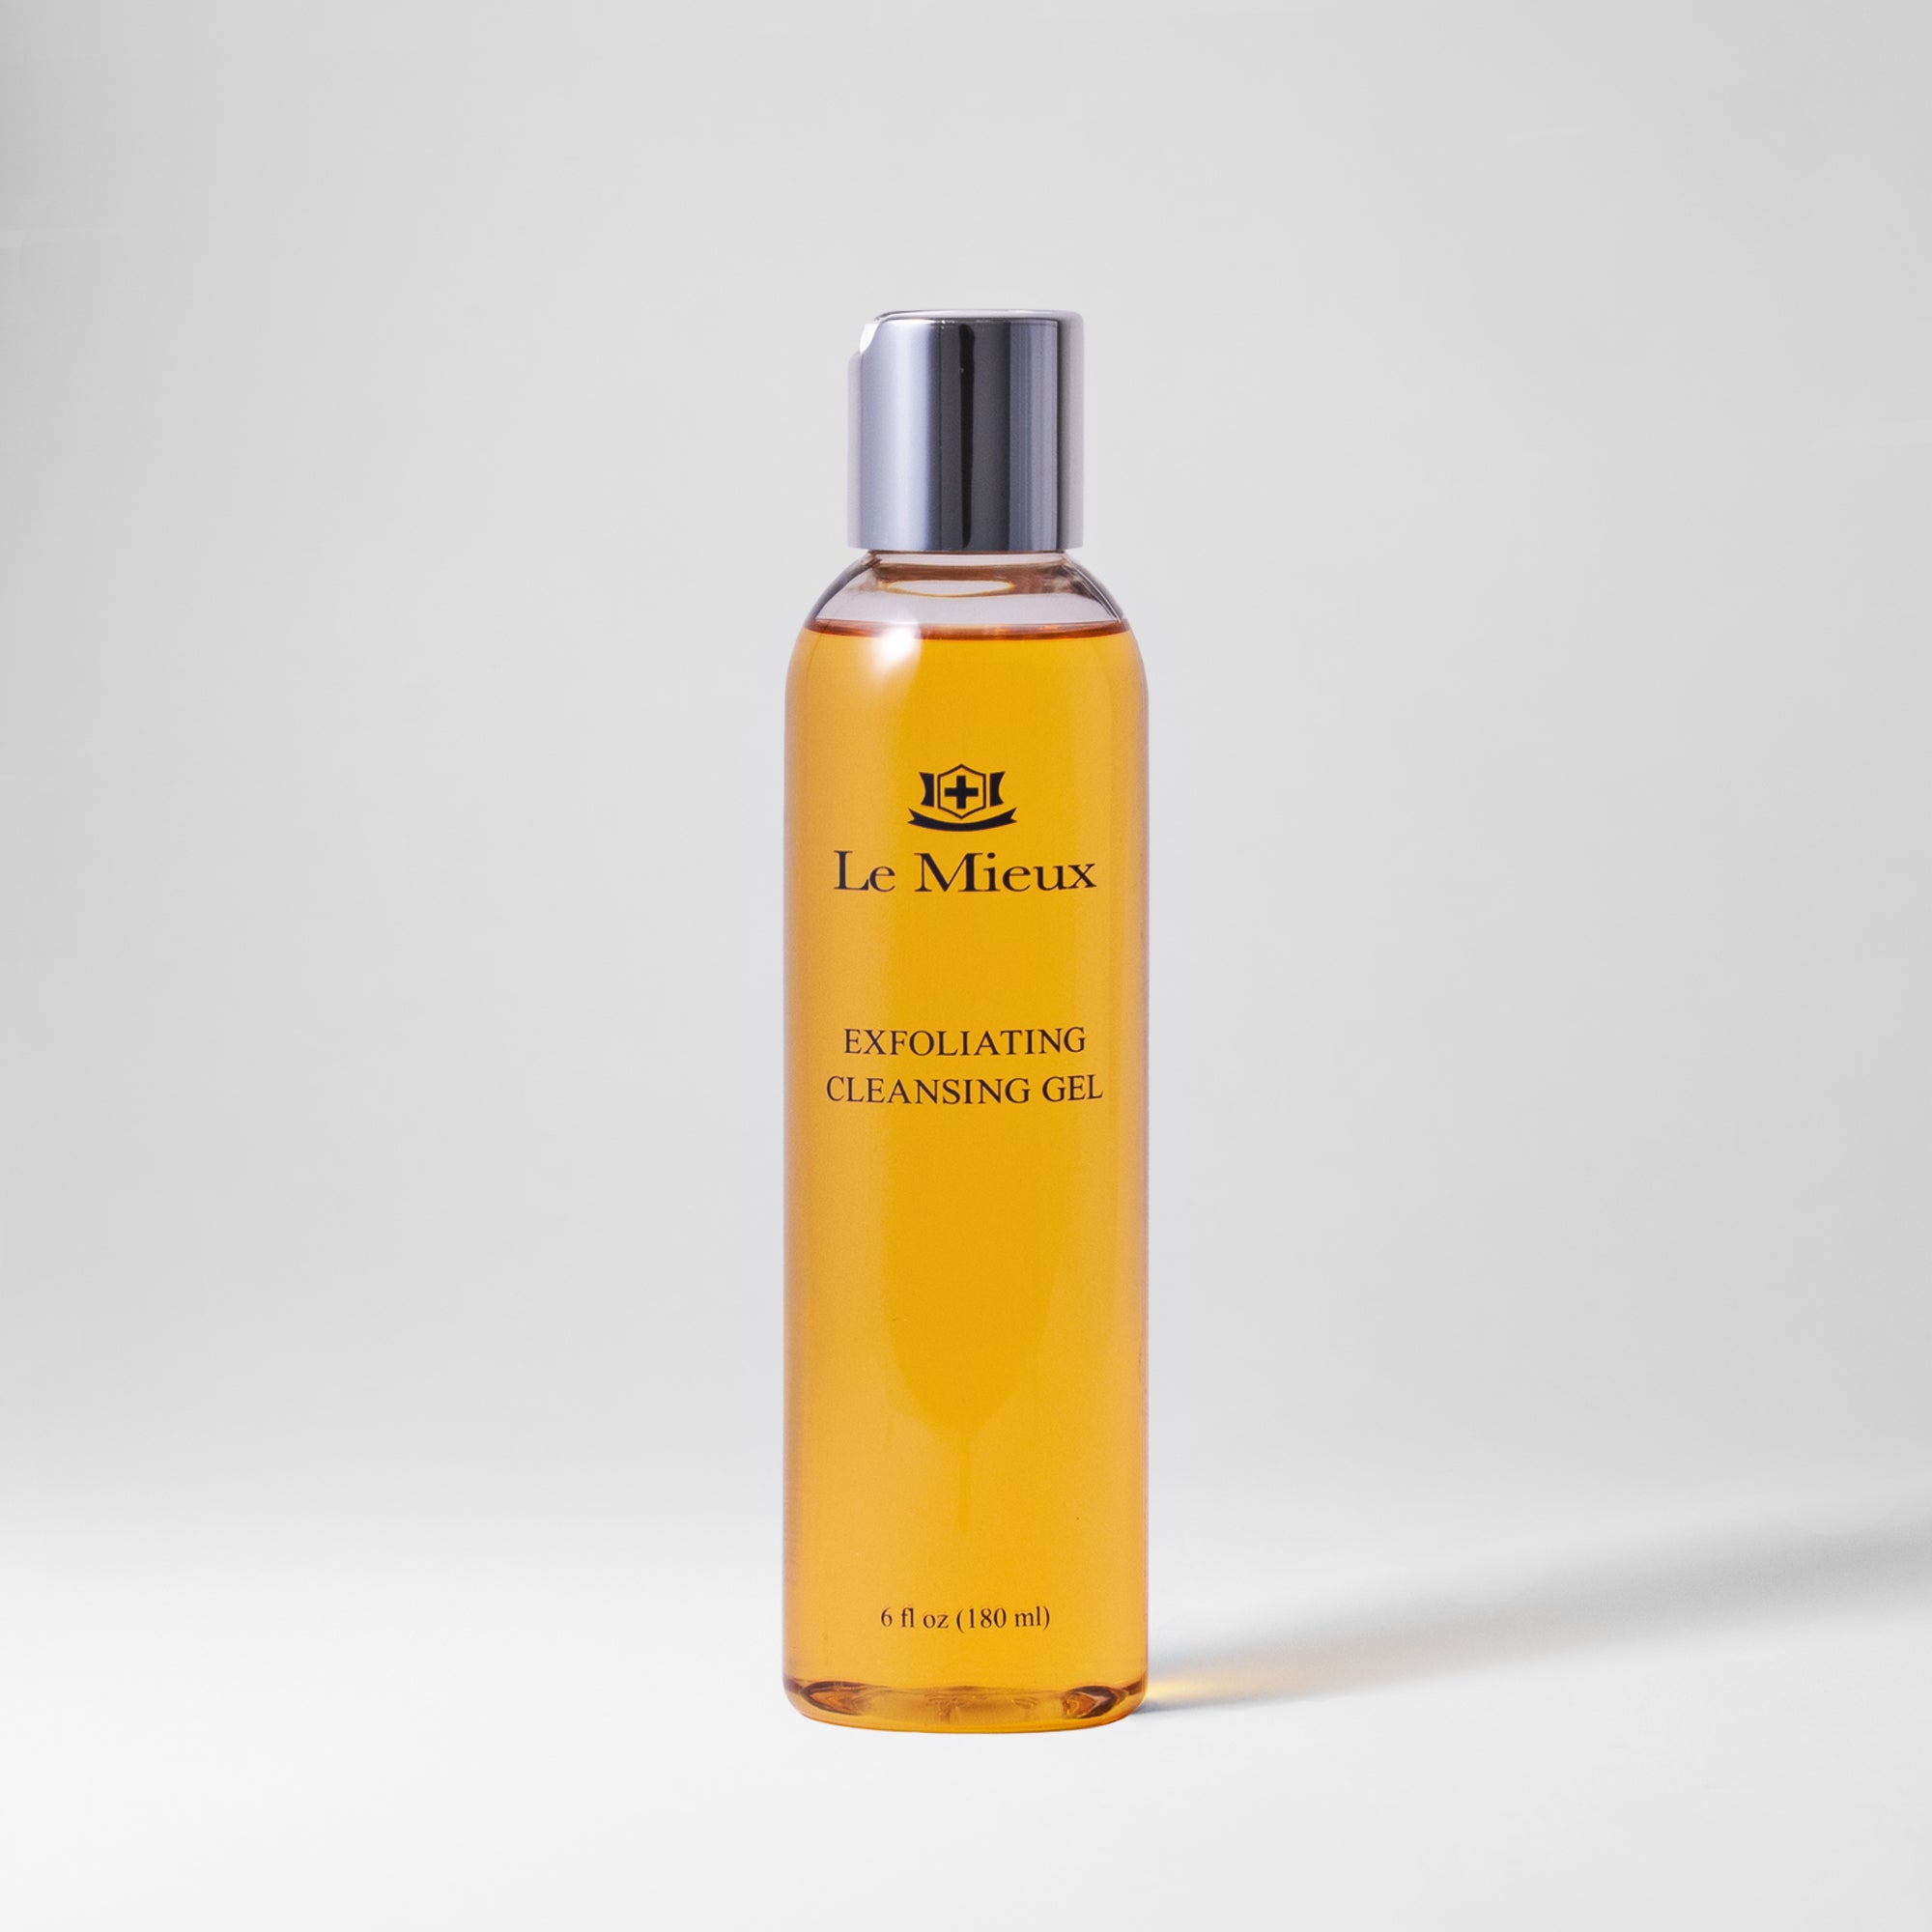  EXFOLIATING CLEANSING GEL from Le Mieux Skincare - featured